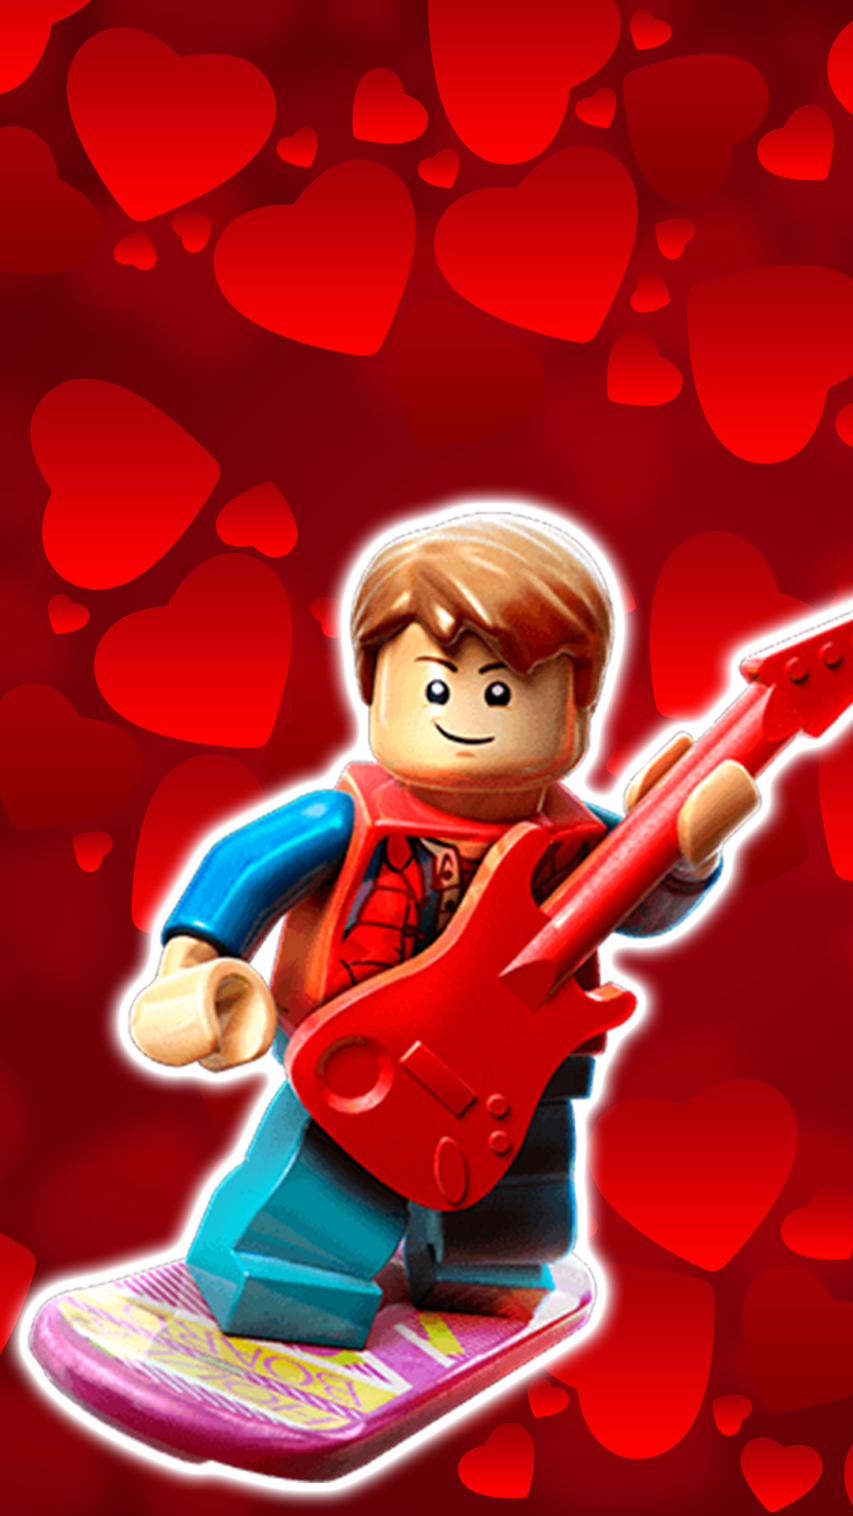 Lego Backgrounds Red image Png